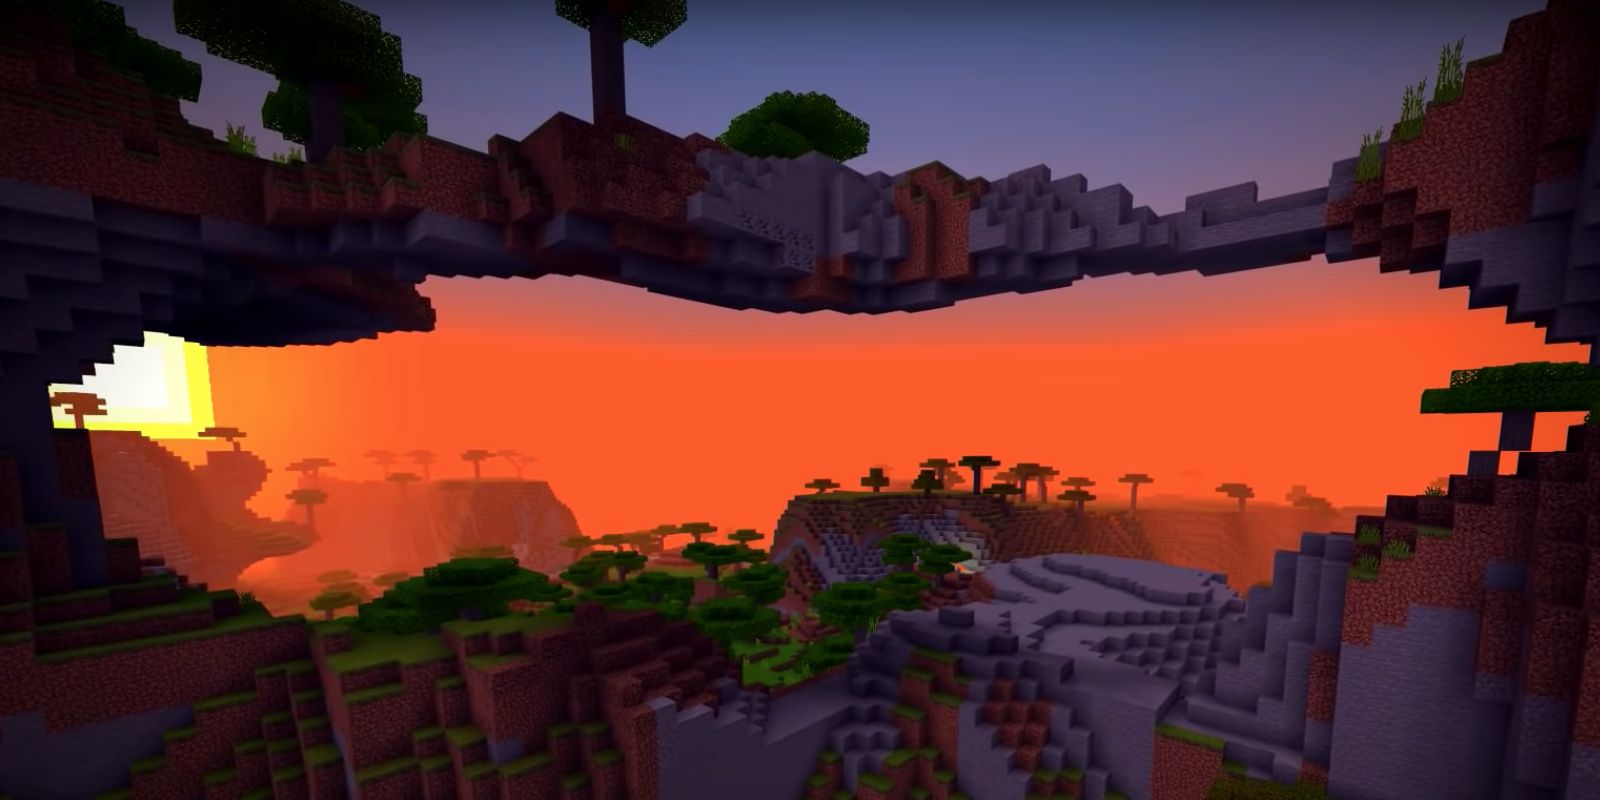 The Coolest Minecraft Seeds for 2021